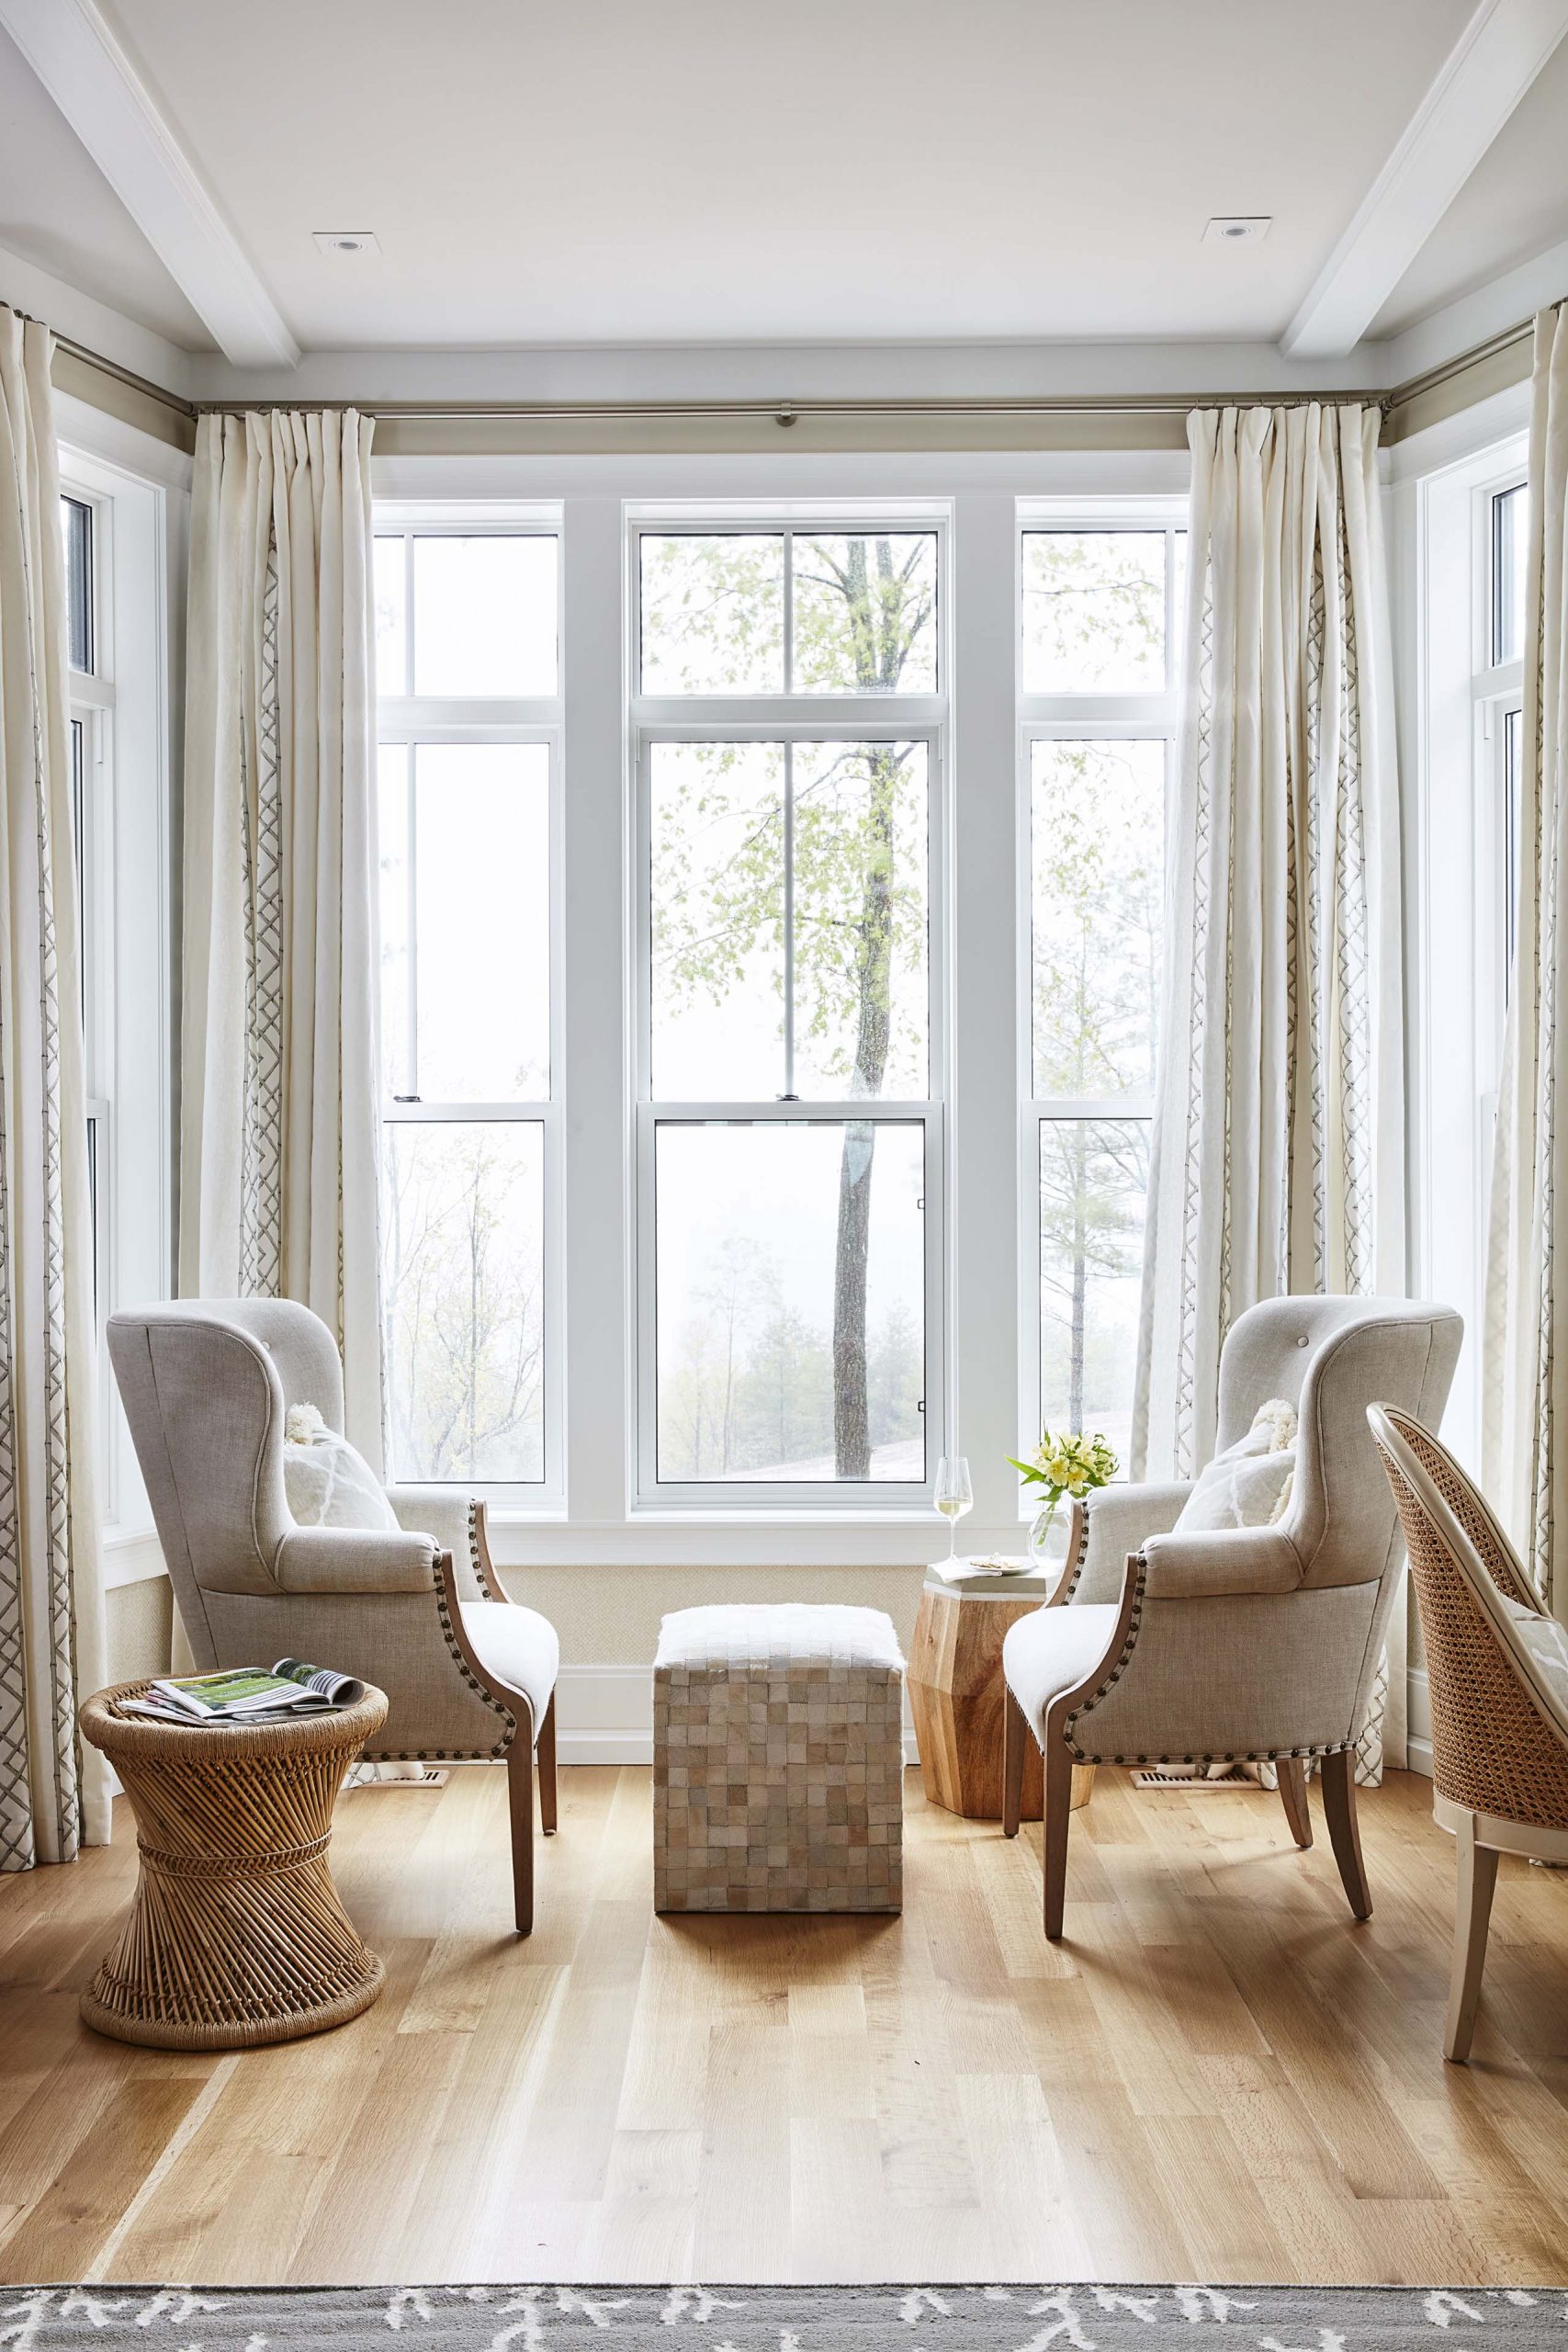 Large bay windows allow lots of natural light.